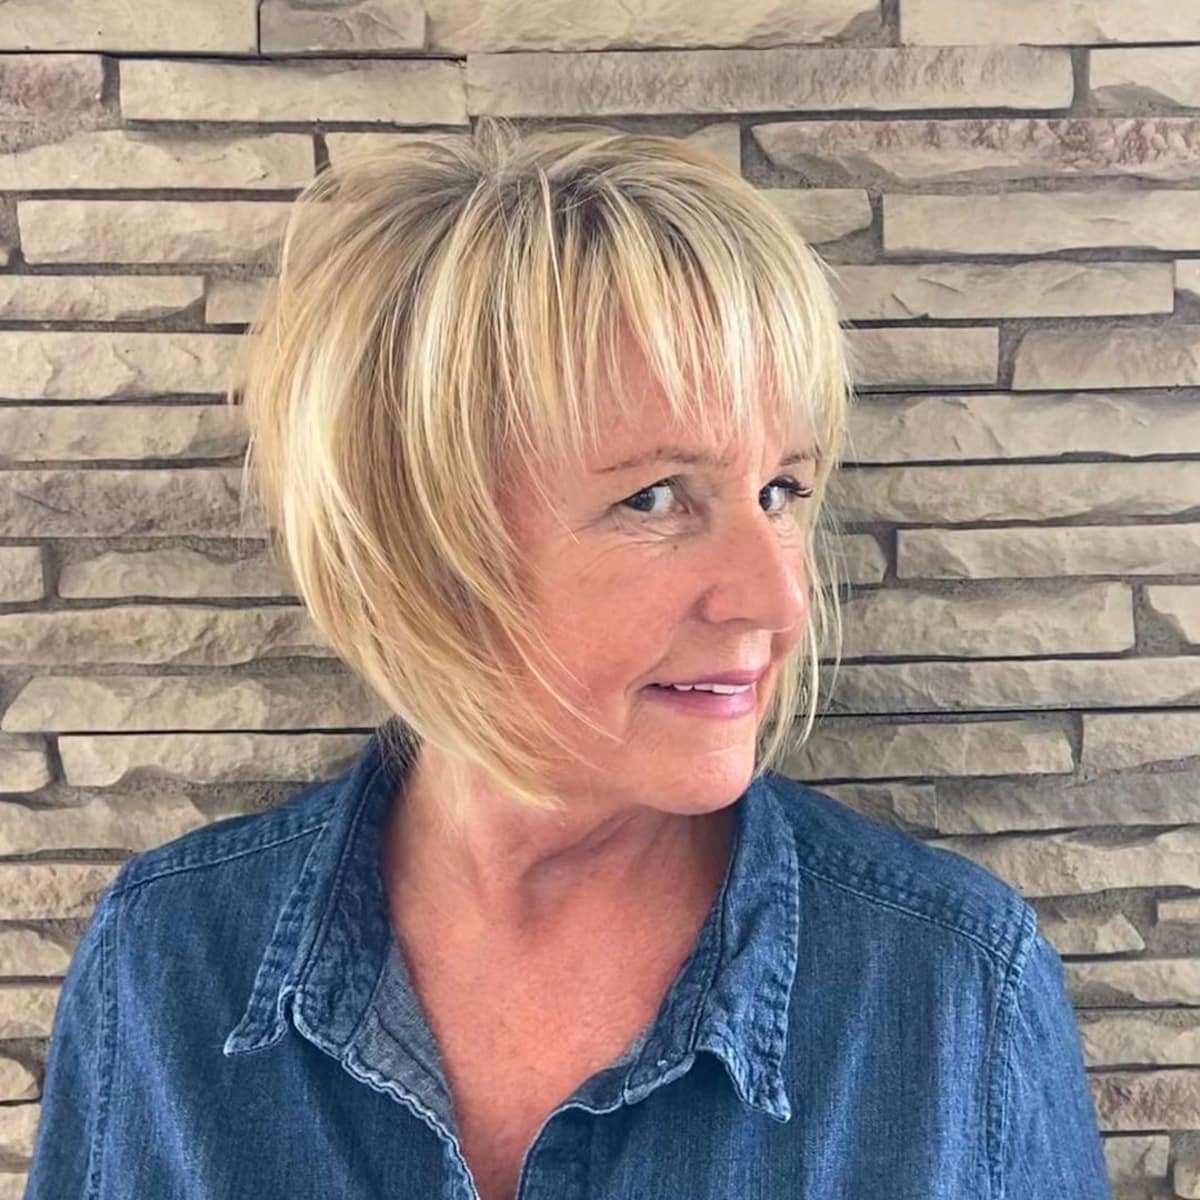 Blonde bob with bangs for chin-length thick haired women over 50